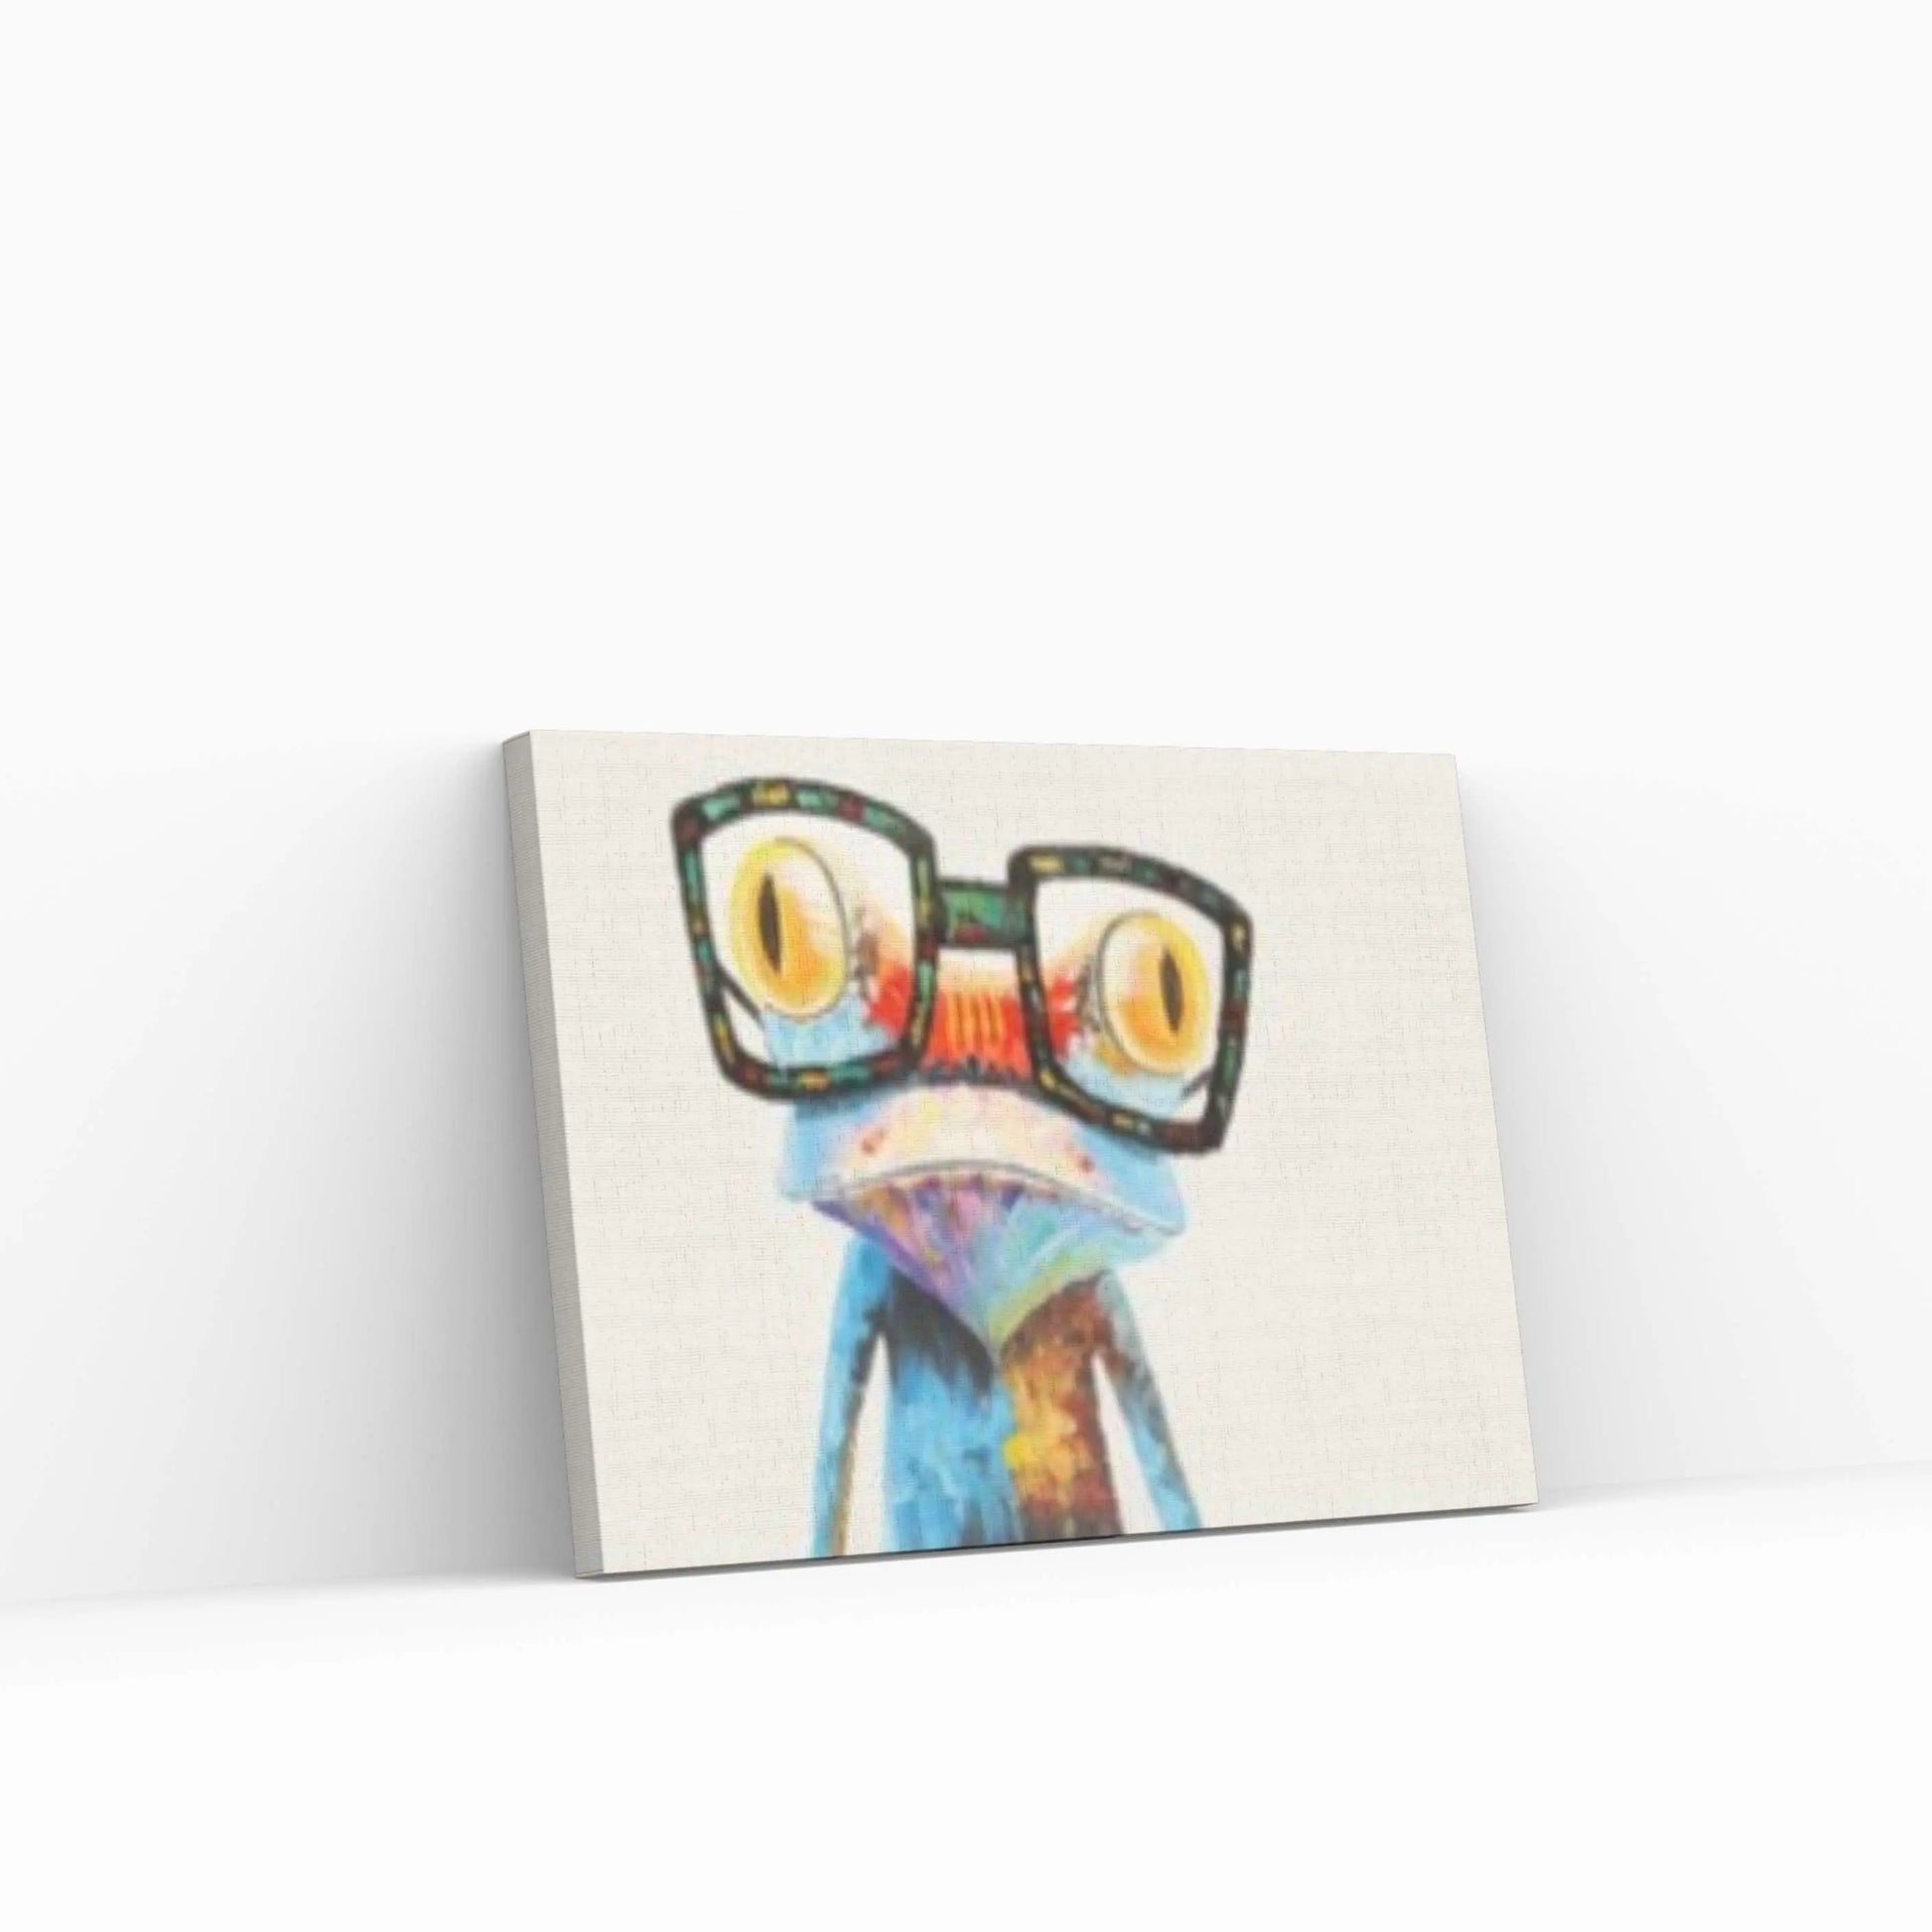 Frog Painting Pop Art Animal Acrylic Paintings On Canvas Original Modern, Knife Texture Framed - Y Canvas